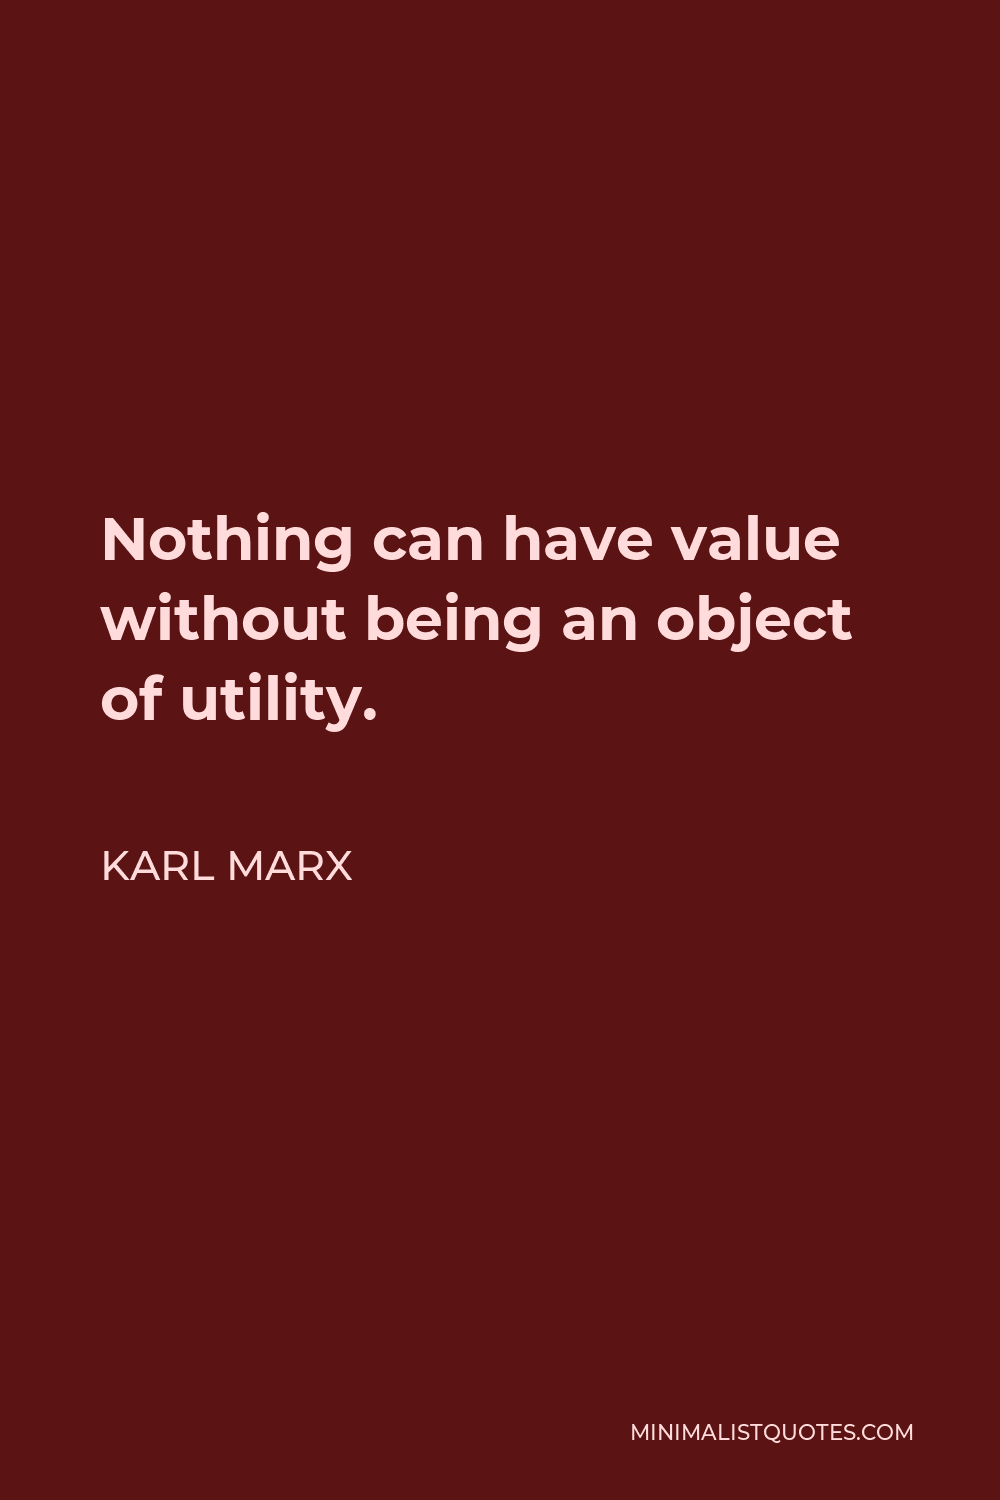 Karl Marx Quote - Nothing can have value without being an object of utility.